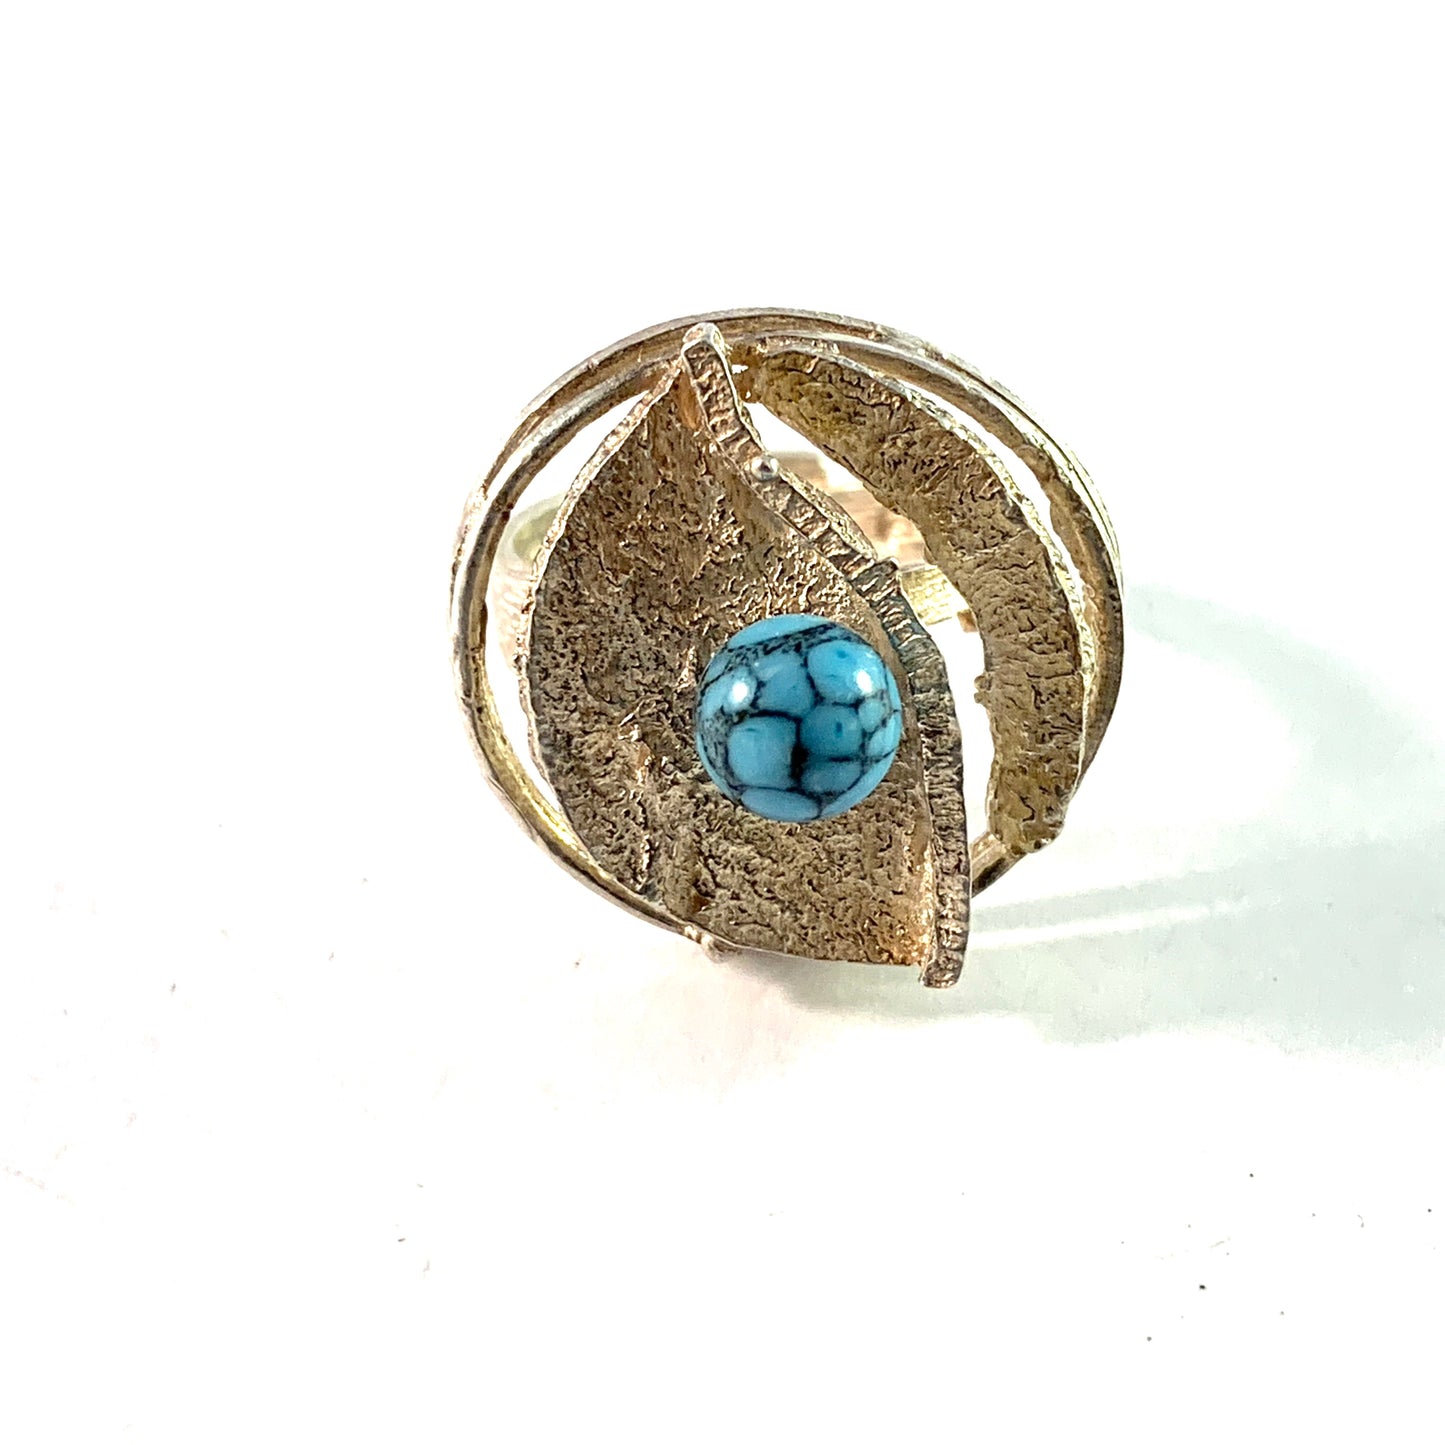 Germany 1970s. Vintage 835 Silver Faux Turquoise Ring.